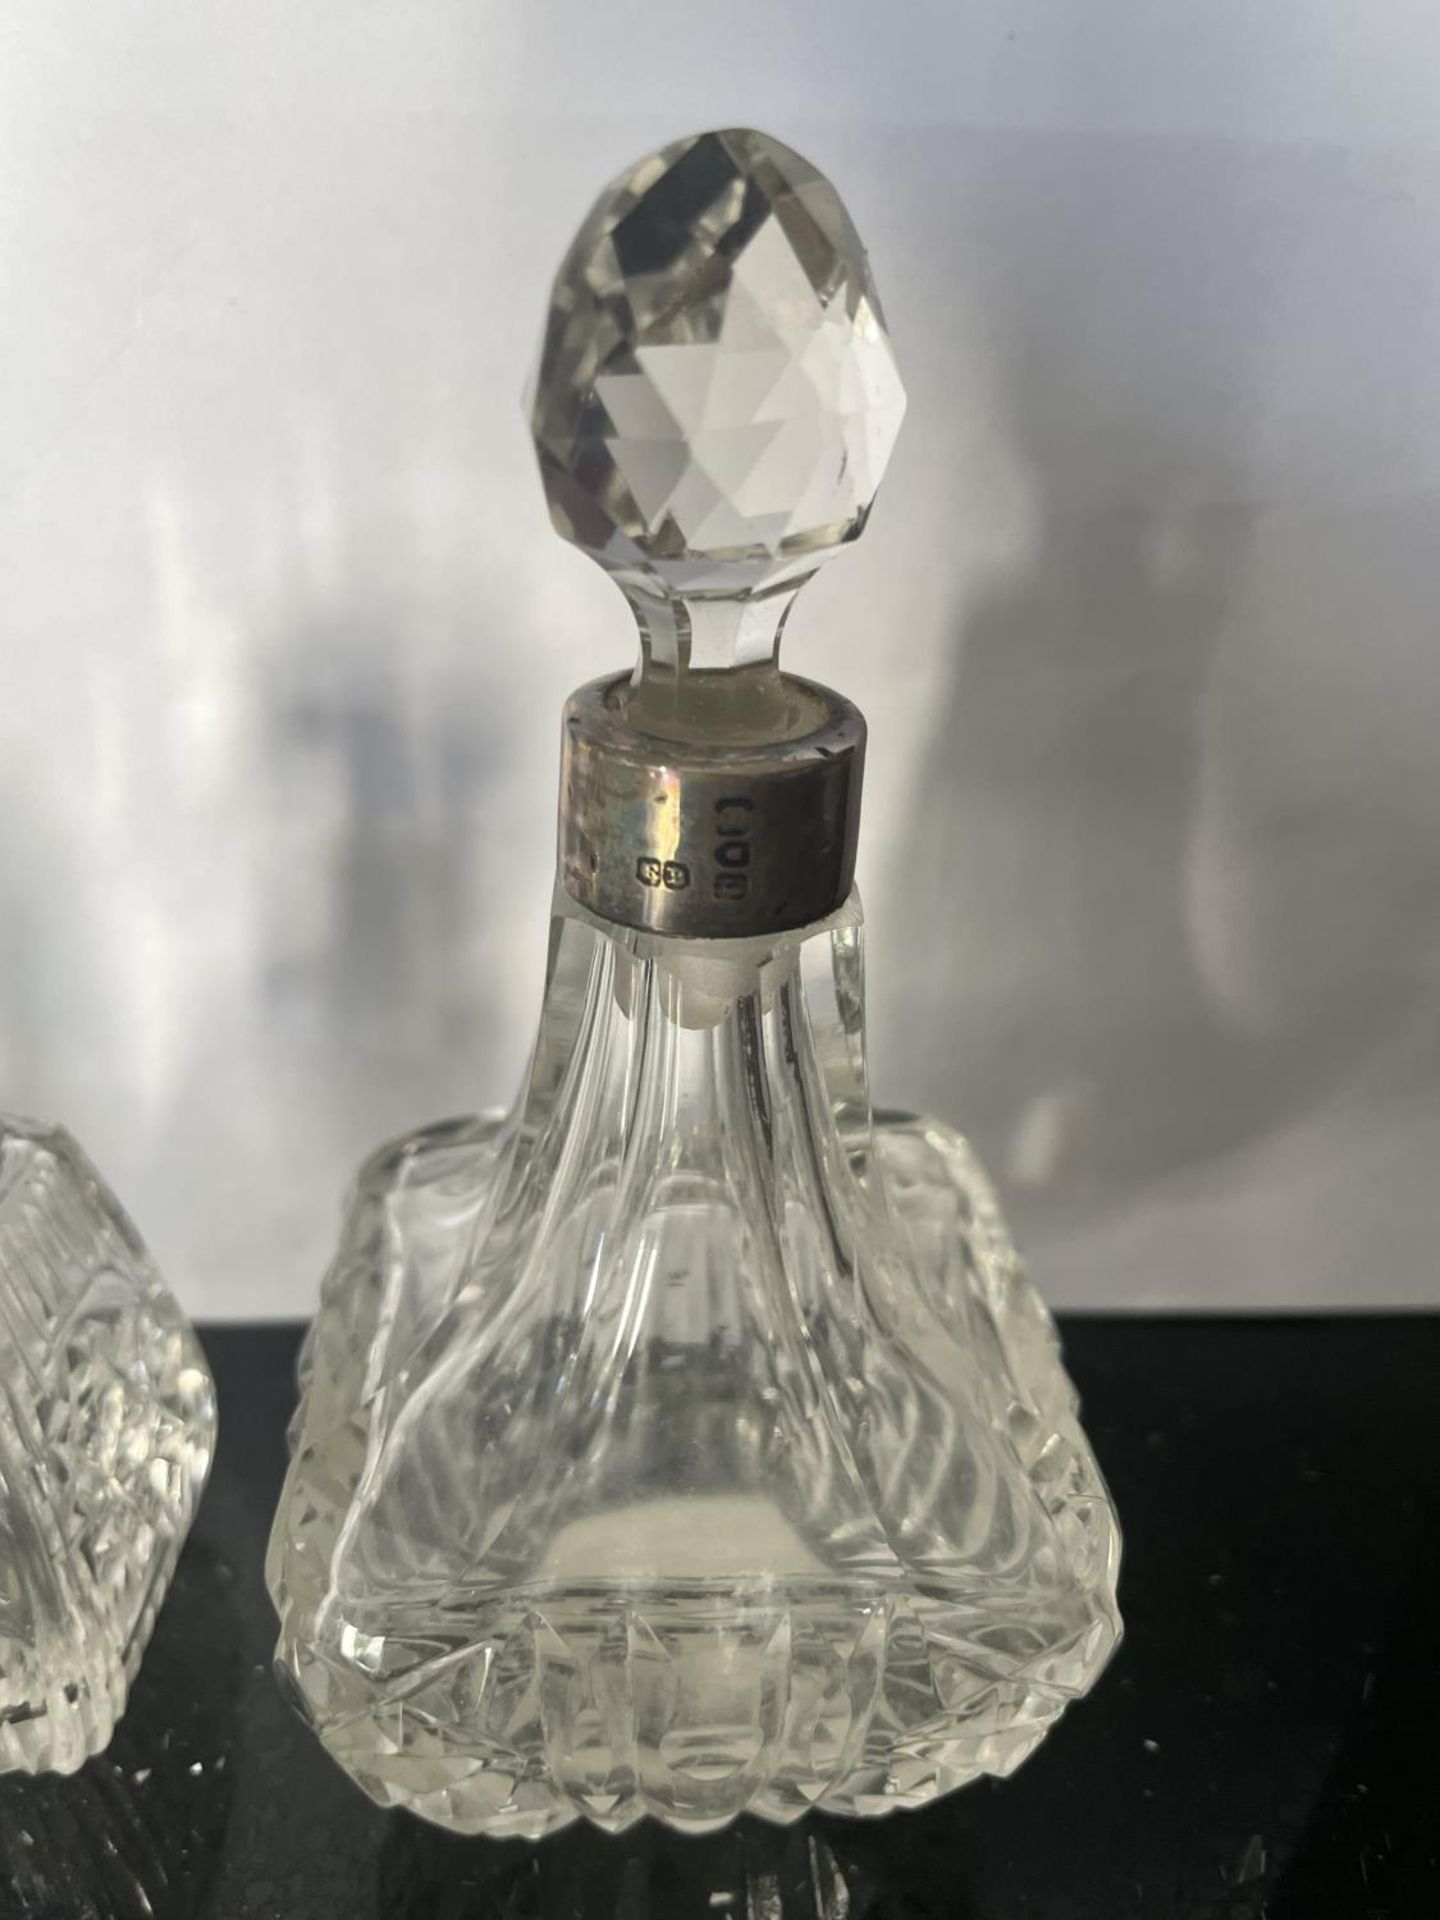 THREE CUT GLASS PERFUME BOTTLE WITH HALLMARKED LONDON SILVER COLLARS - Image 4 of 4